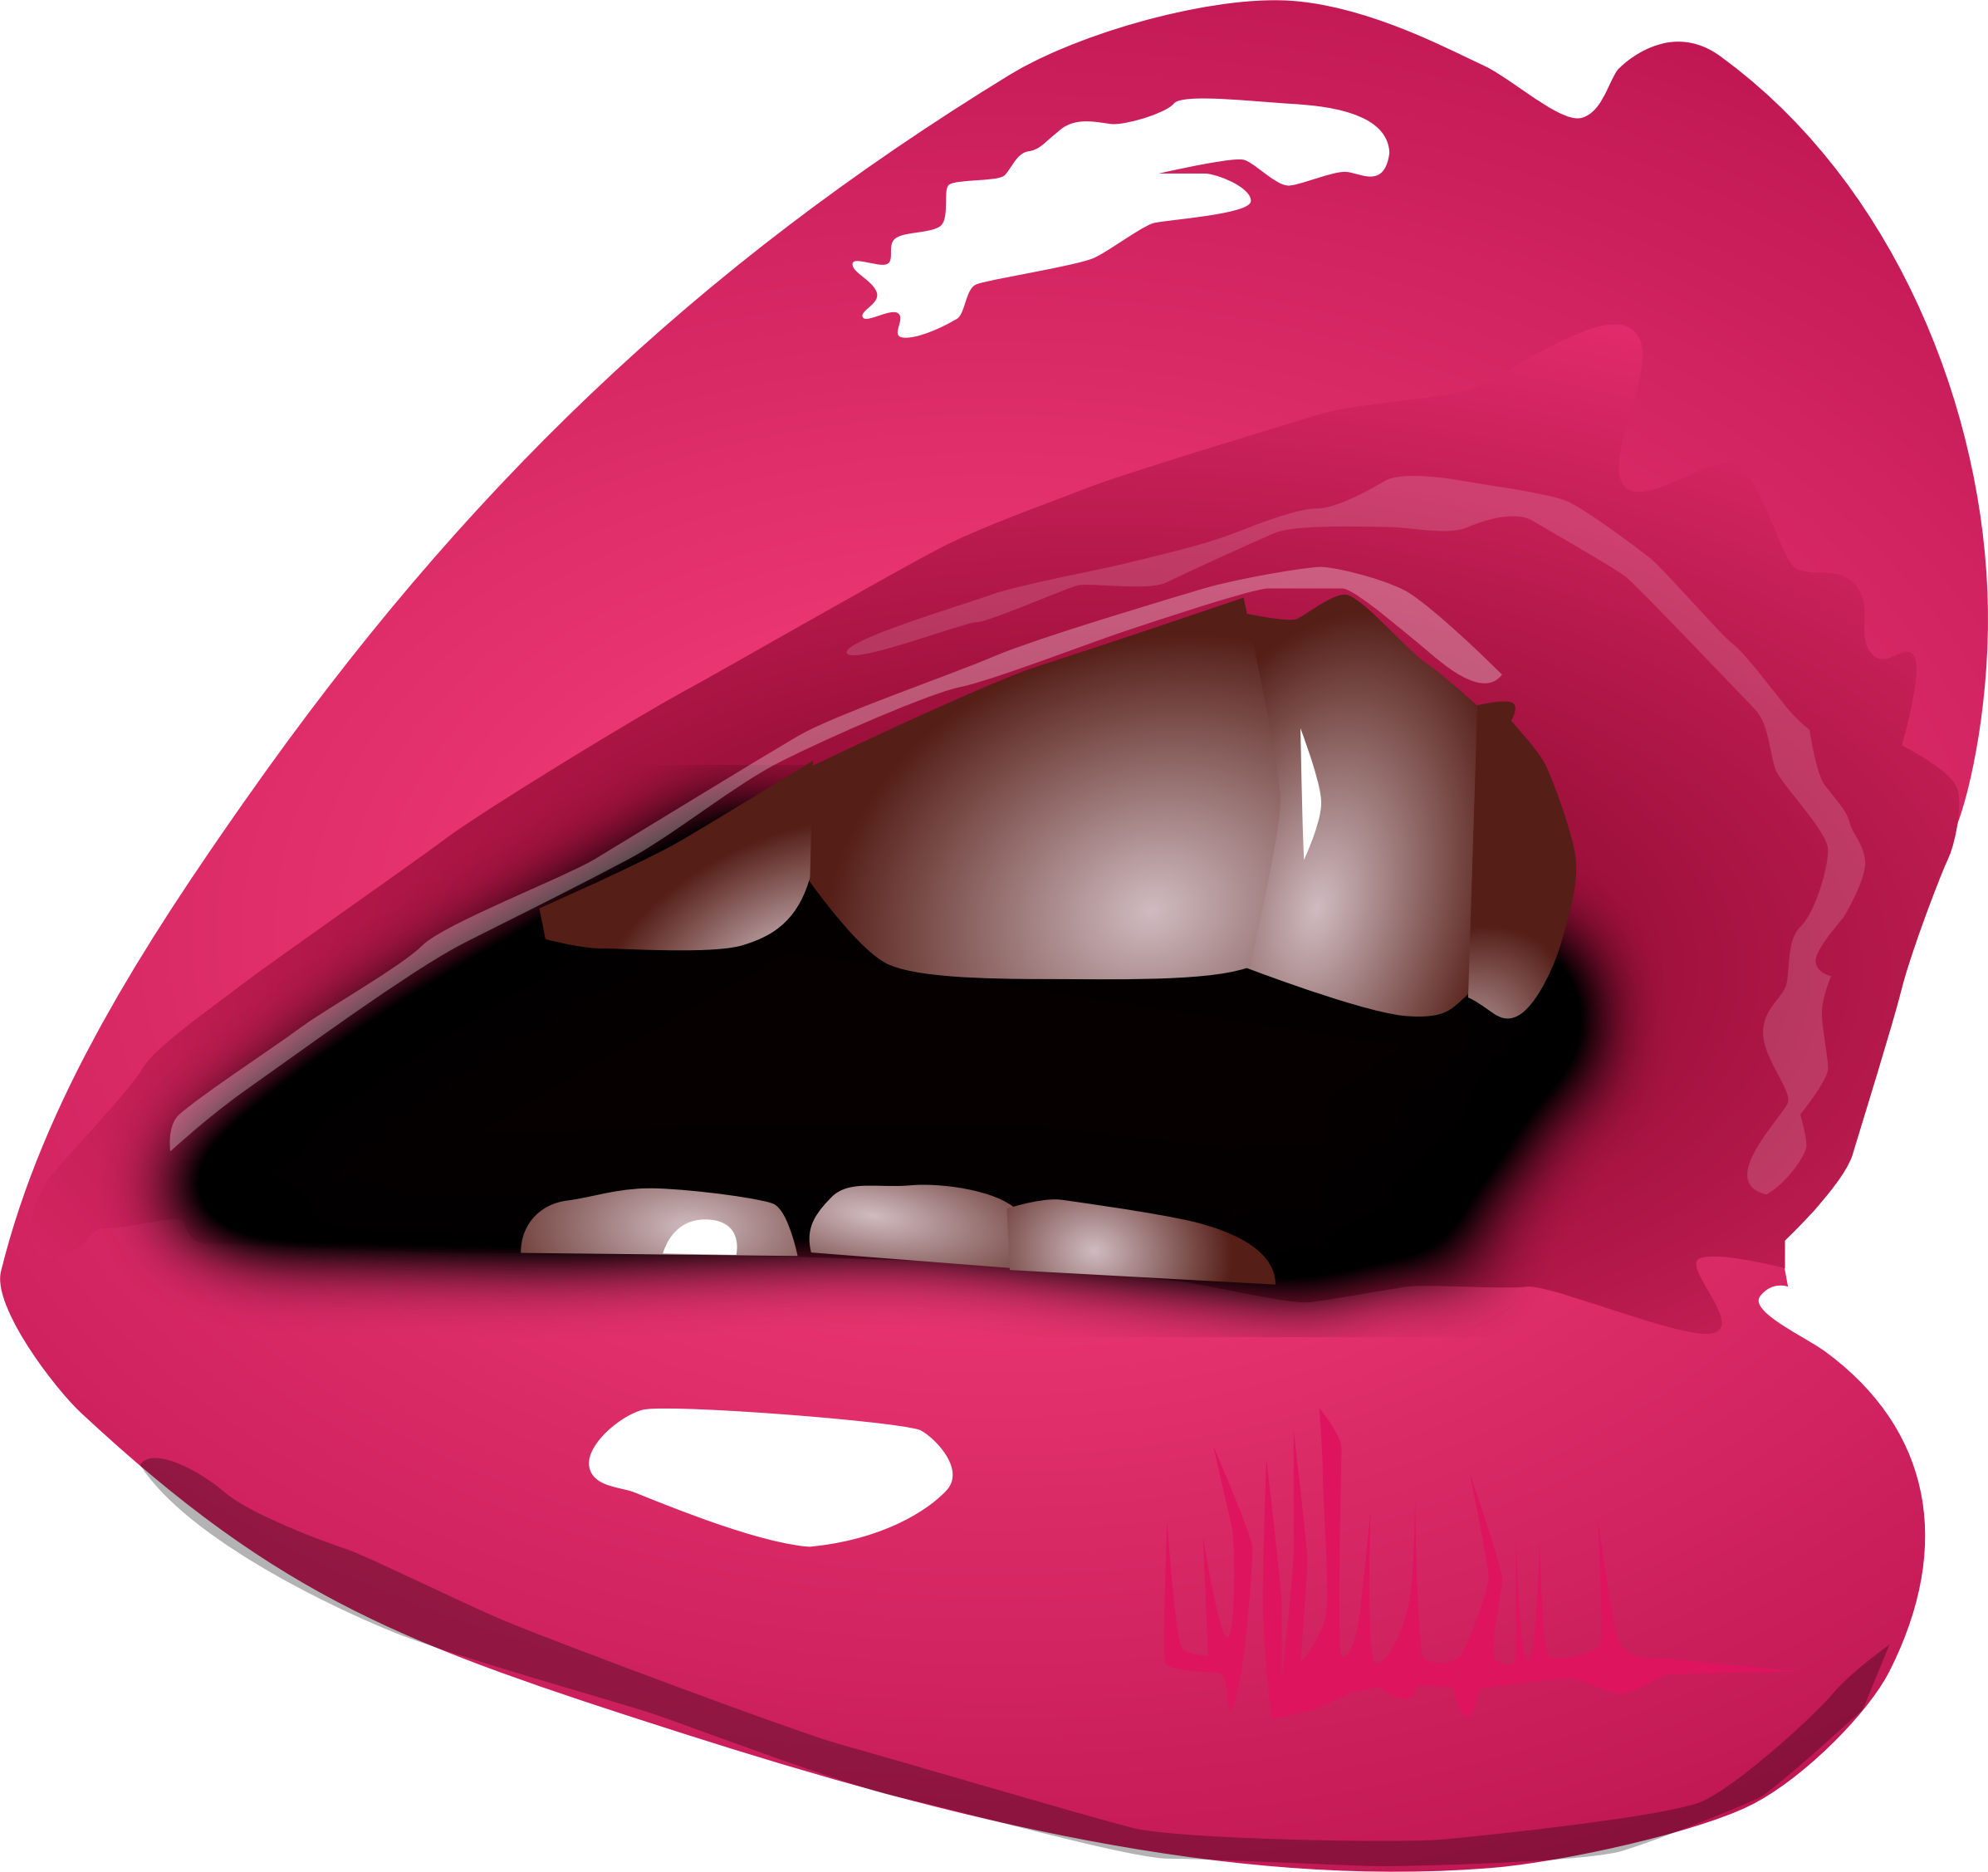 Lips Vector Png. Clipart. - Mouth Talking, Transparent background PNG HD thumbnail